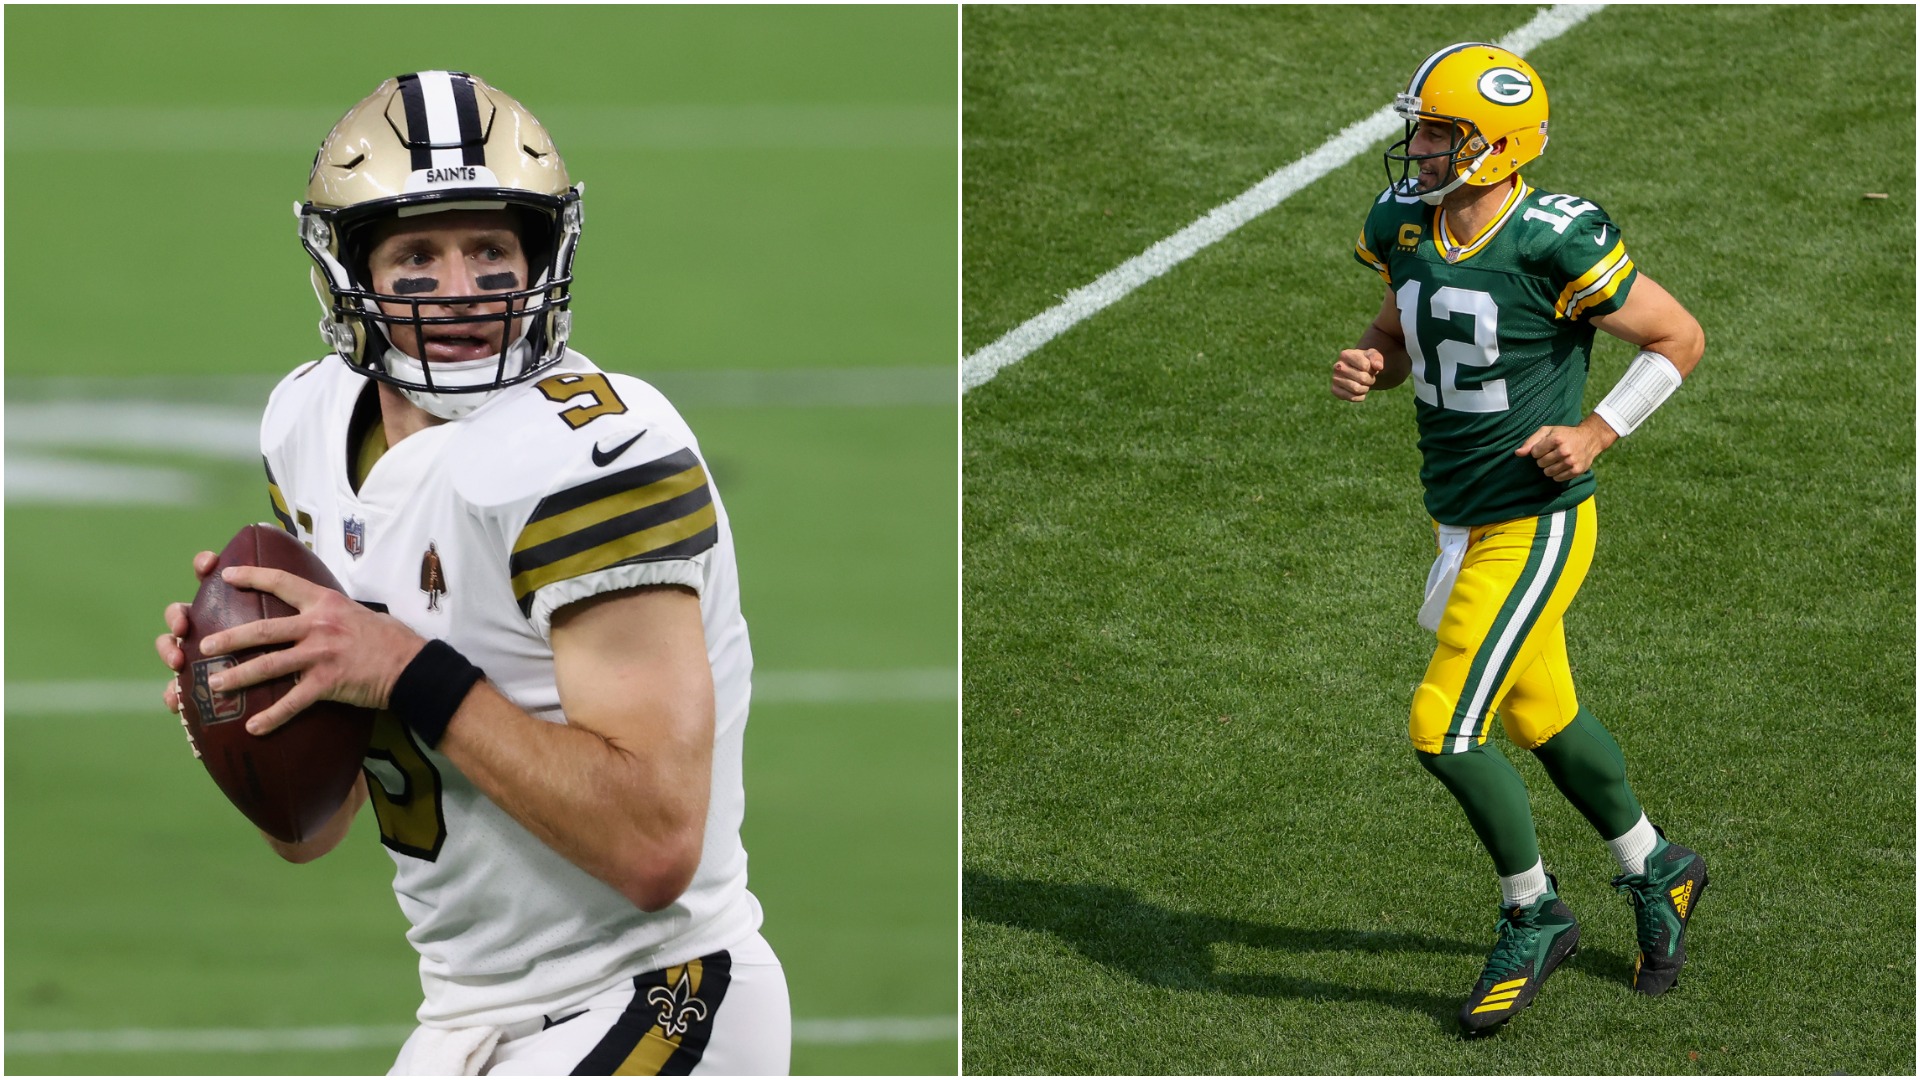 Both Aaron Rodgers and Drew Brees have had impressive NFL careers. Which quarterback has the larger net worth?